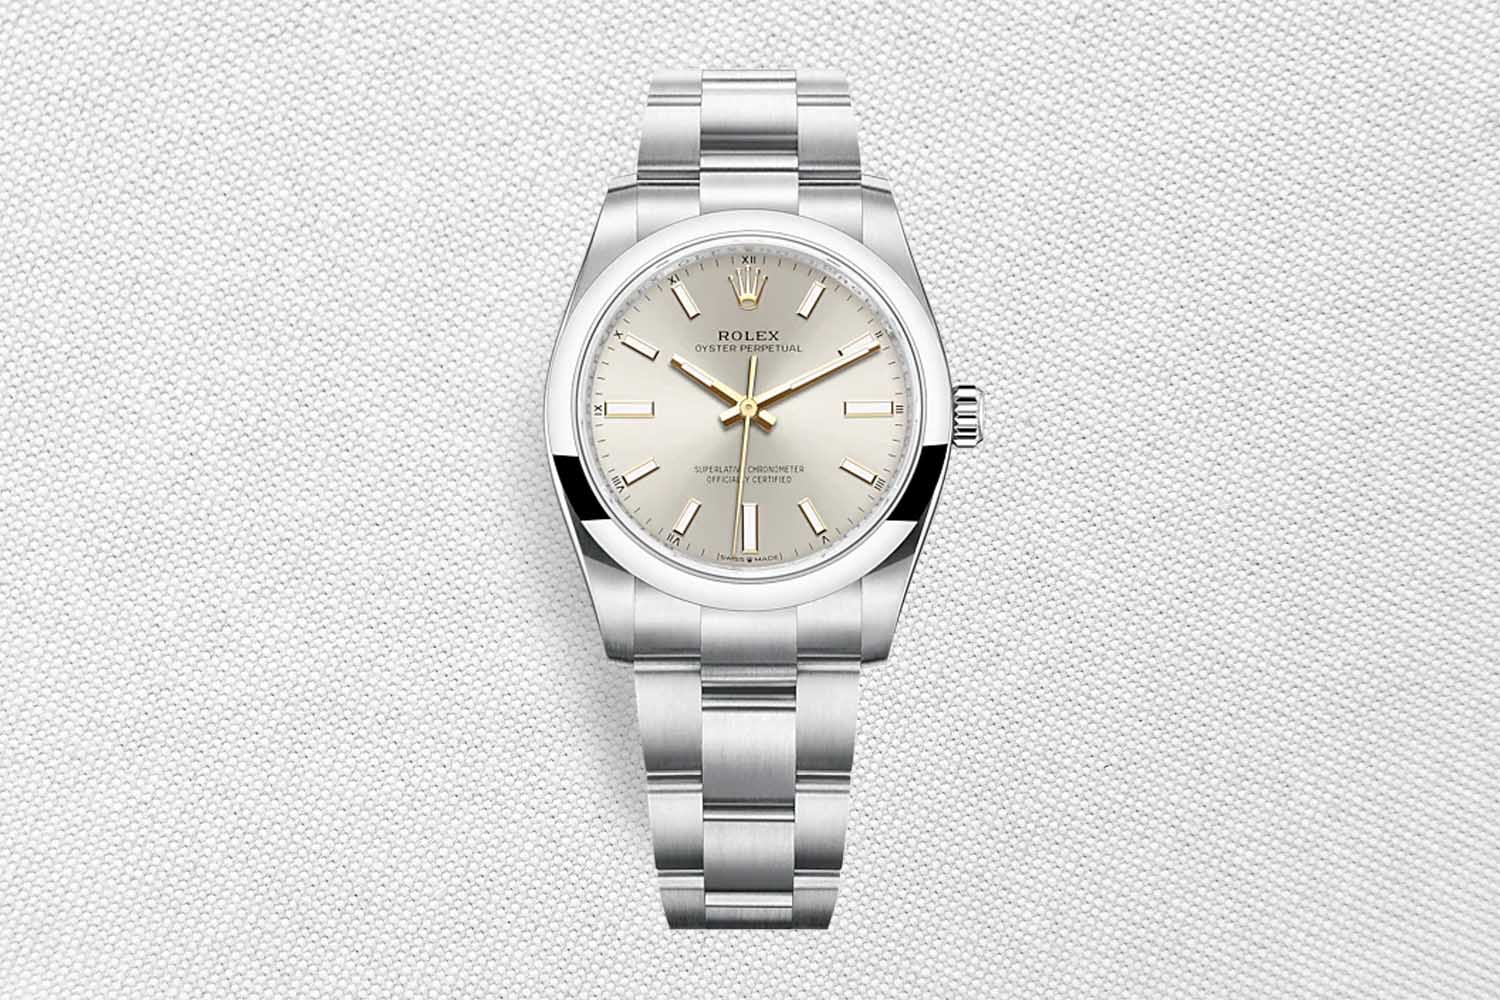 The Rolex Oyster Perpetual 34mm